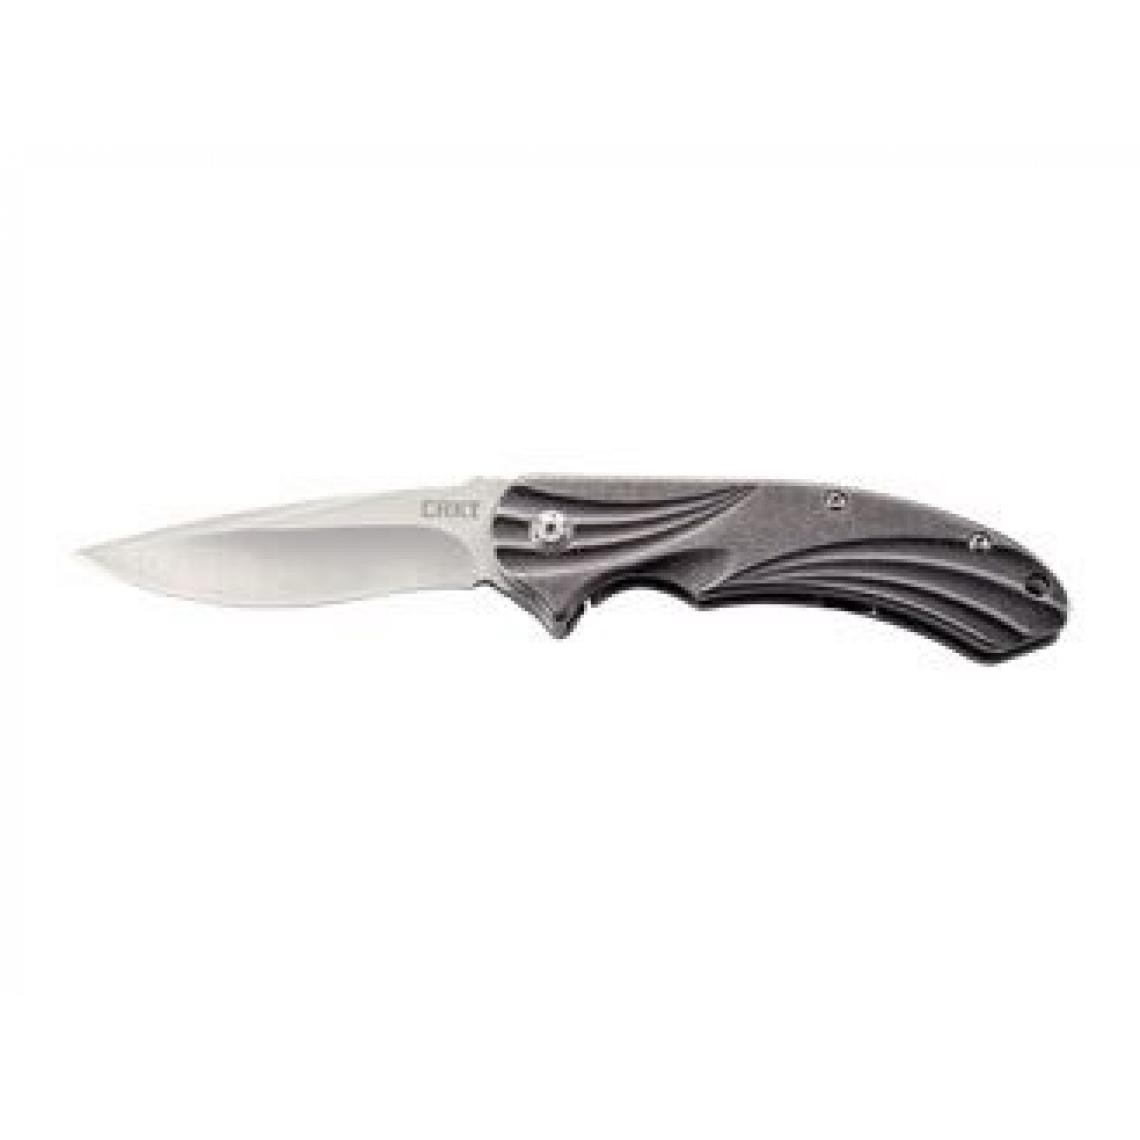 Crkt - Crkt WILLIWAW 6016 - Outils de coupe